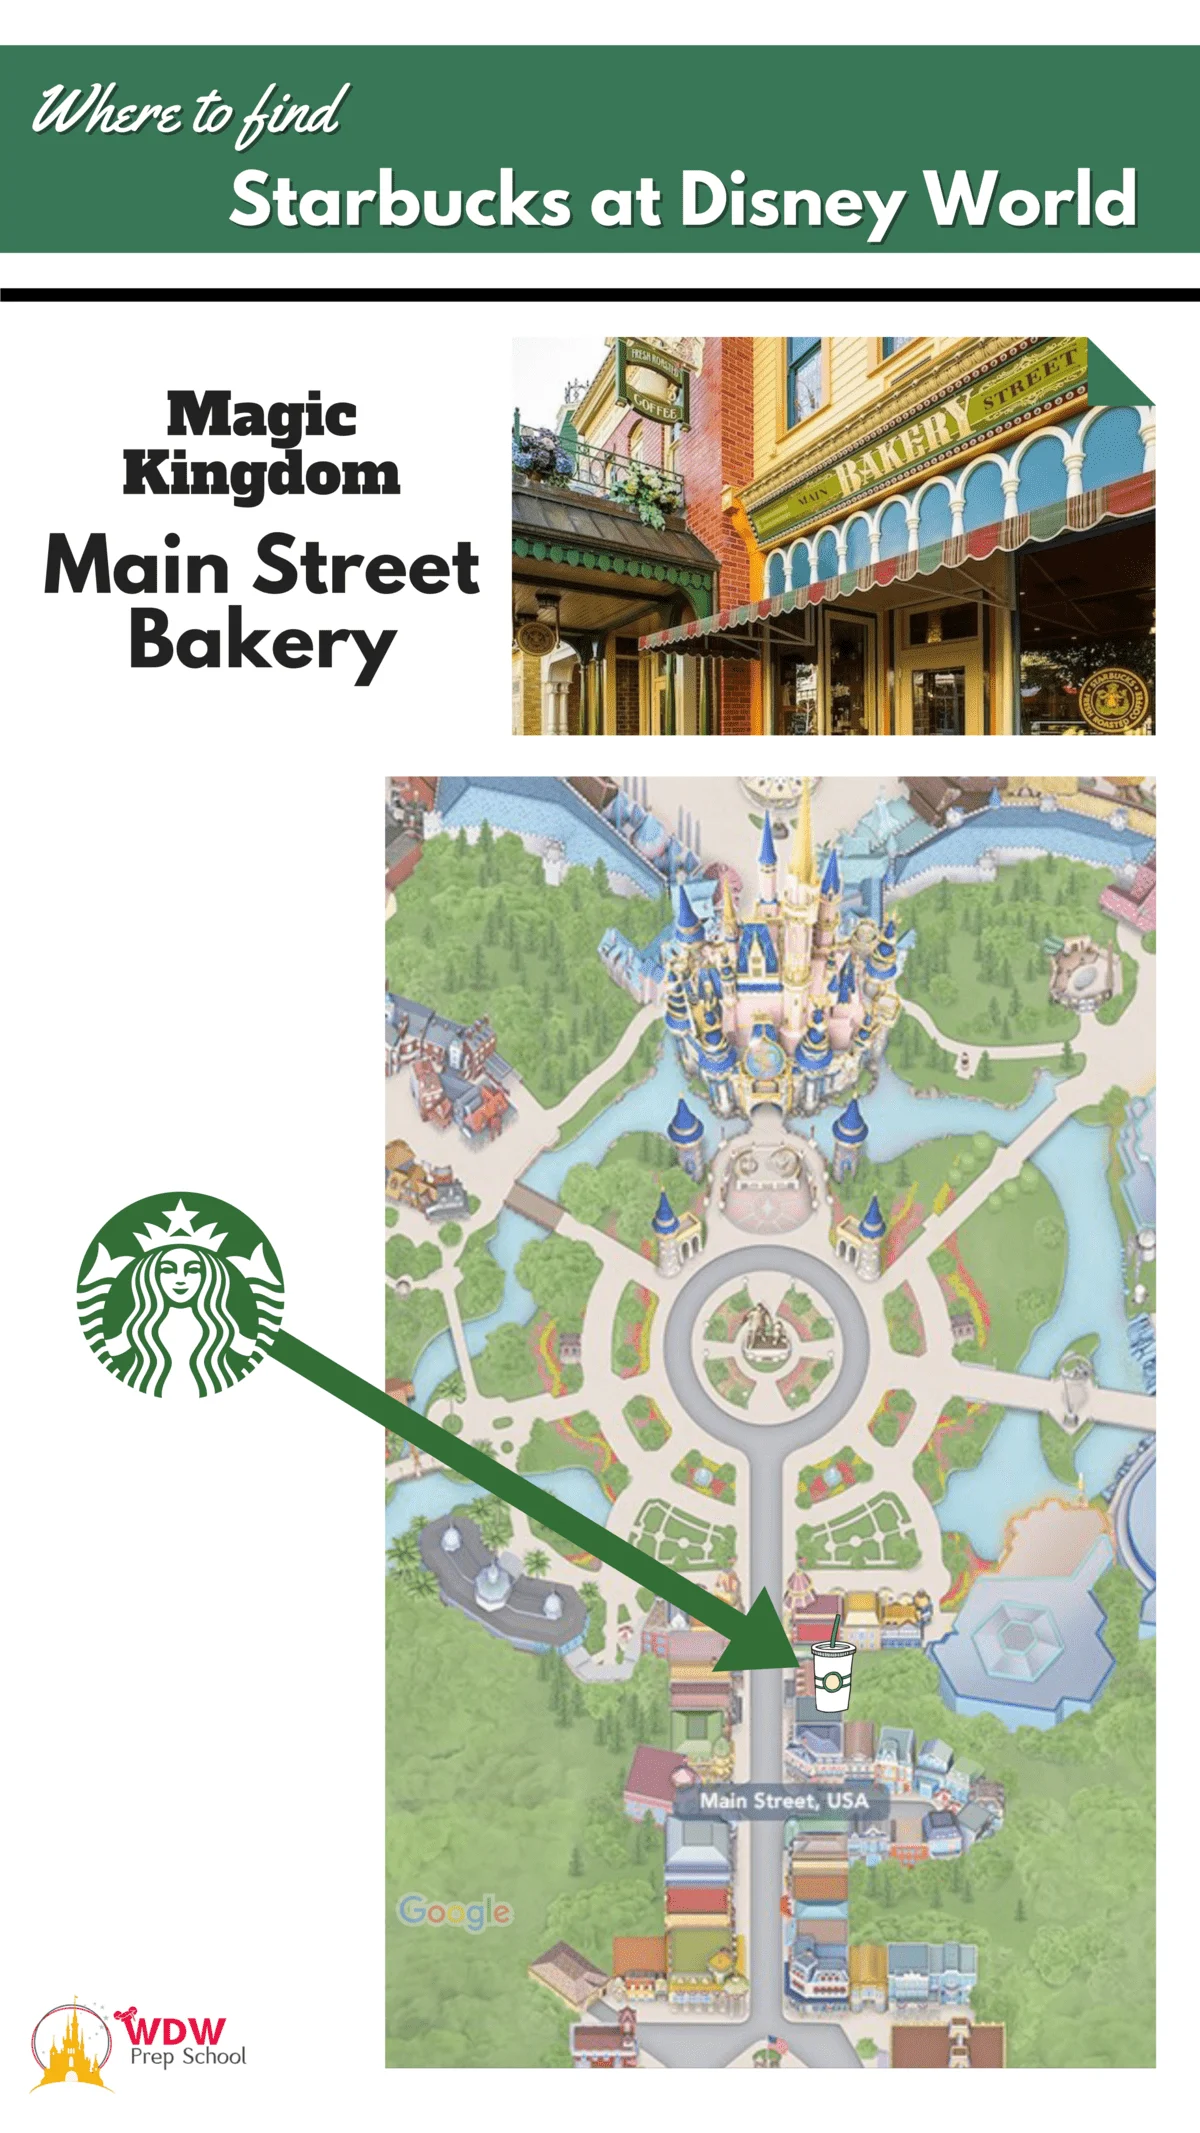 https://wdwprepschool.com/wp-content/uploads/starbucks-at-disney-world-here-everything-you-need-to-know-2.png.webp